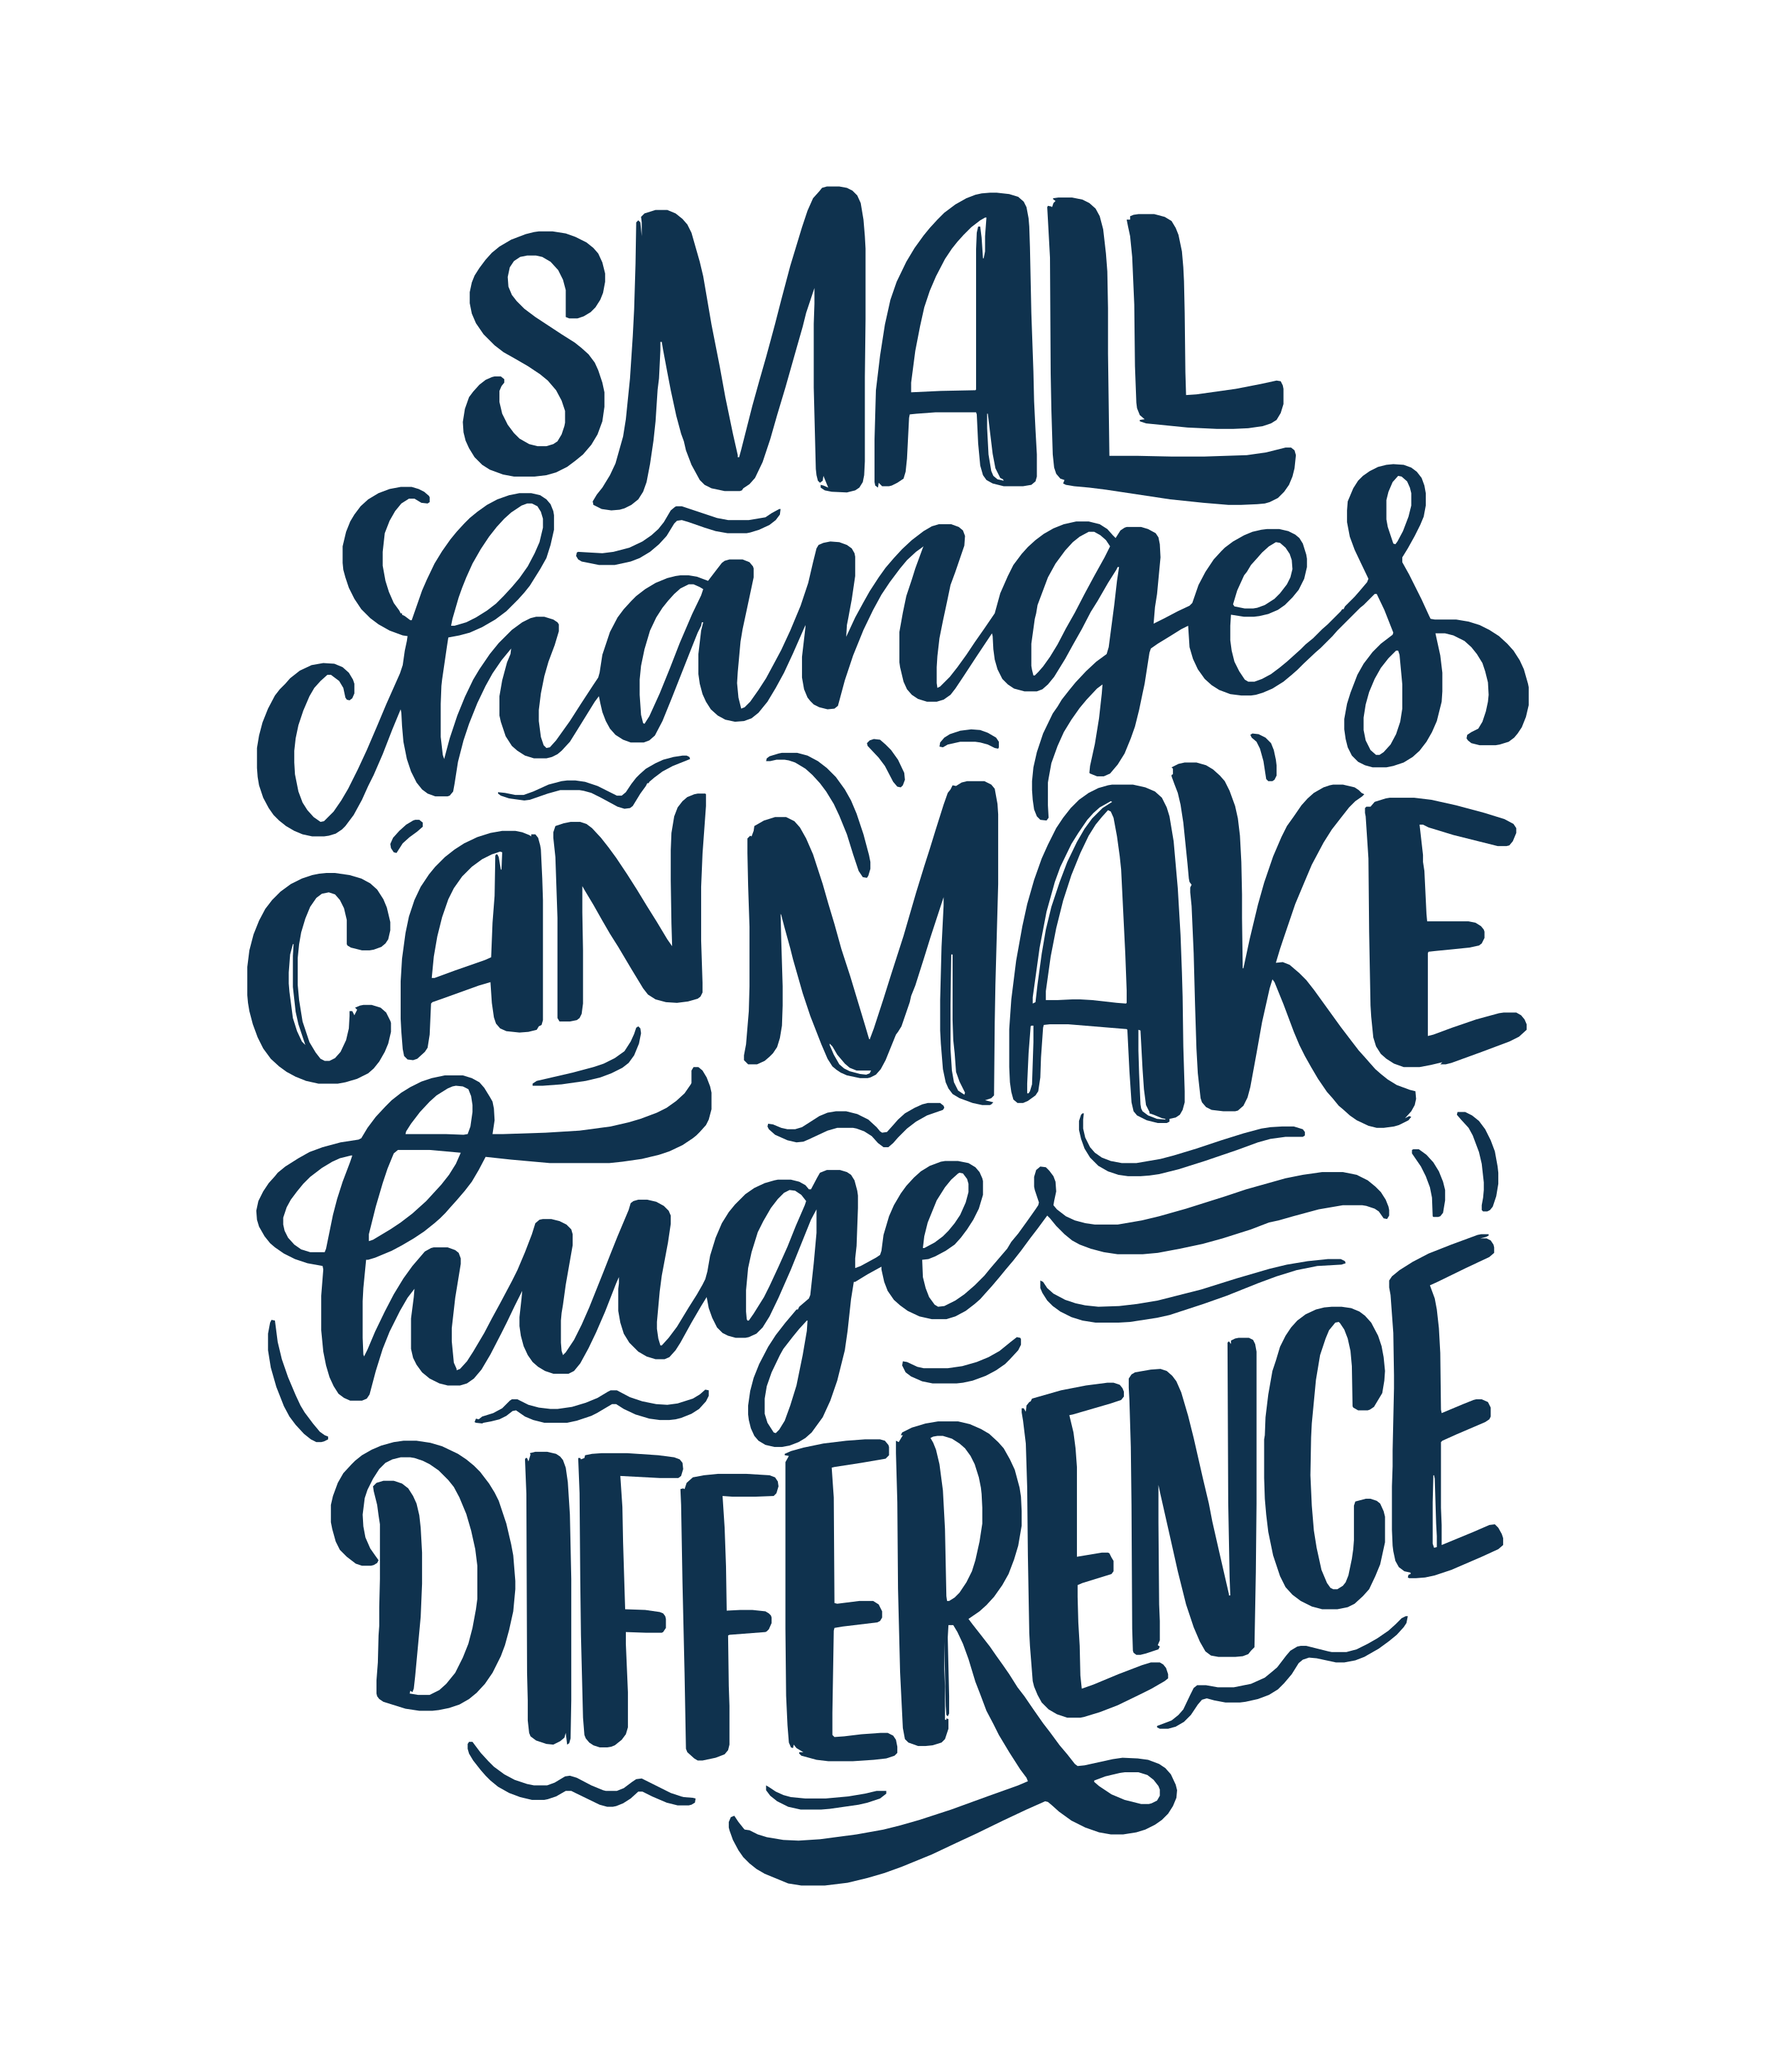 Small Changes Can Make Huge Difference - Original image